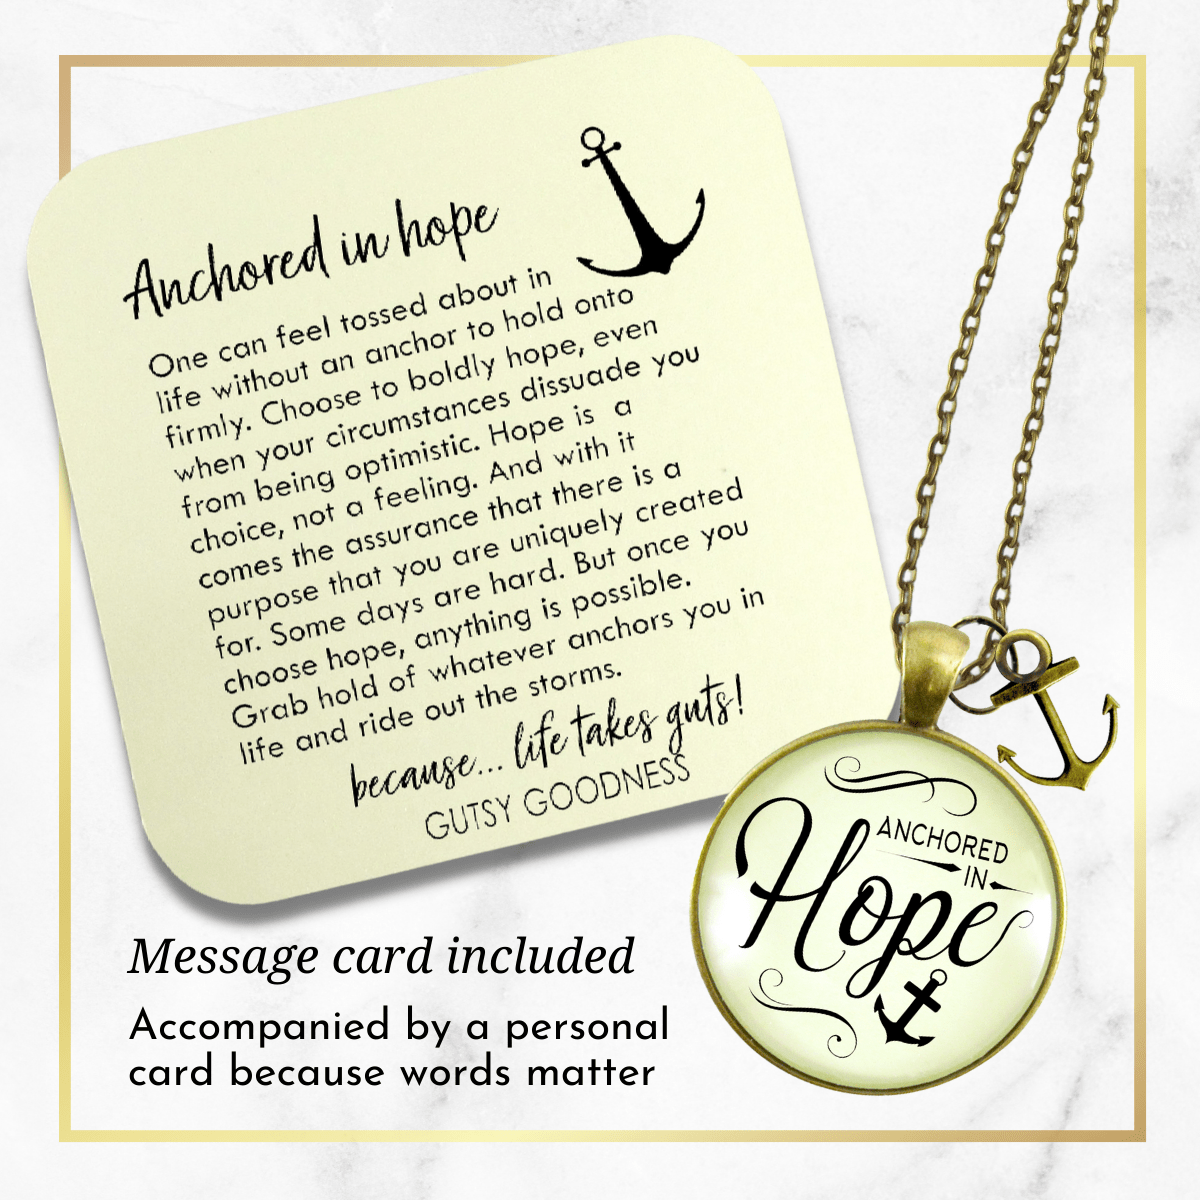 Gutsy Goodness Anchored in Hope Necklace Nautical Theme Faith Words Determination Charm Jewelry - Gutsy Goodness Handmade Jewelry;Anchored In Hope - Gutsy Goodness Handmade Jewelry Gifts